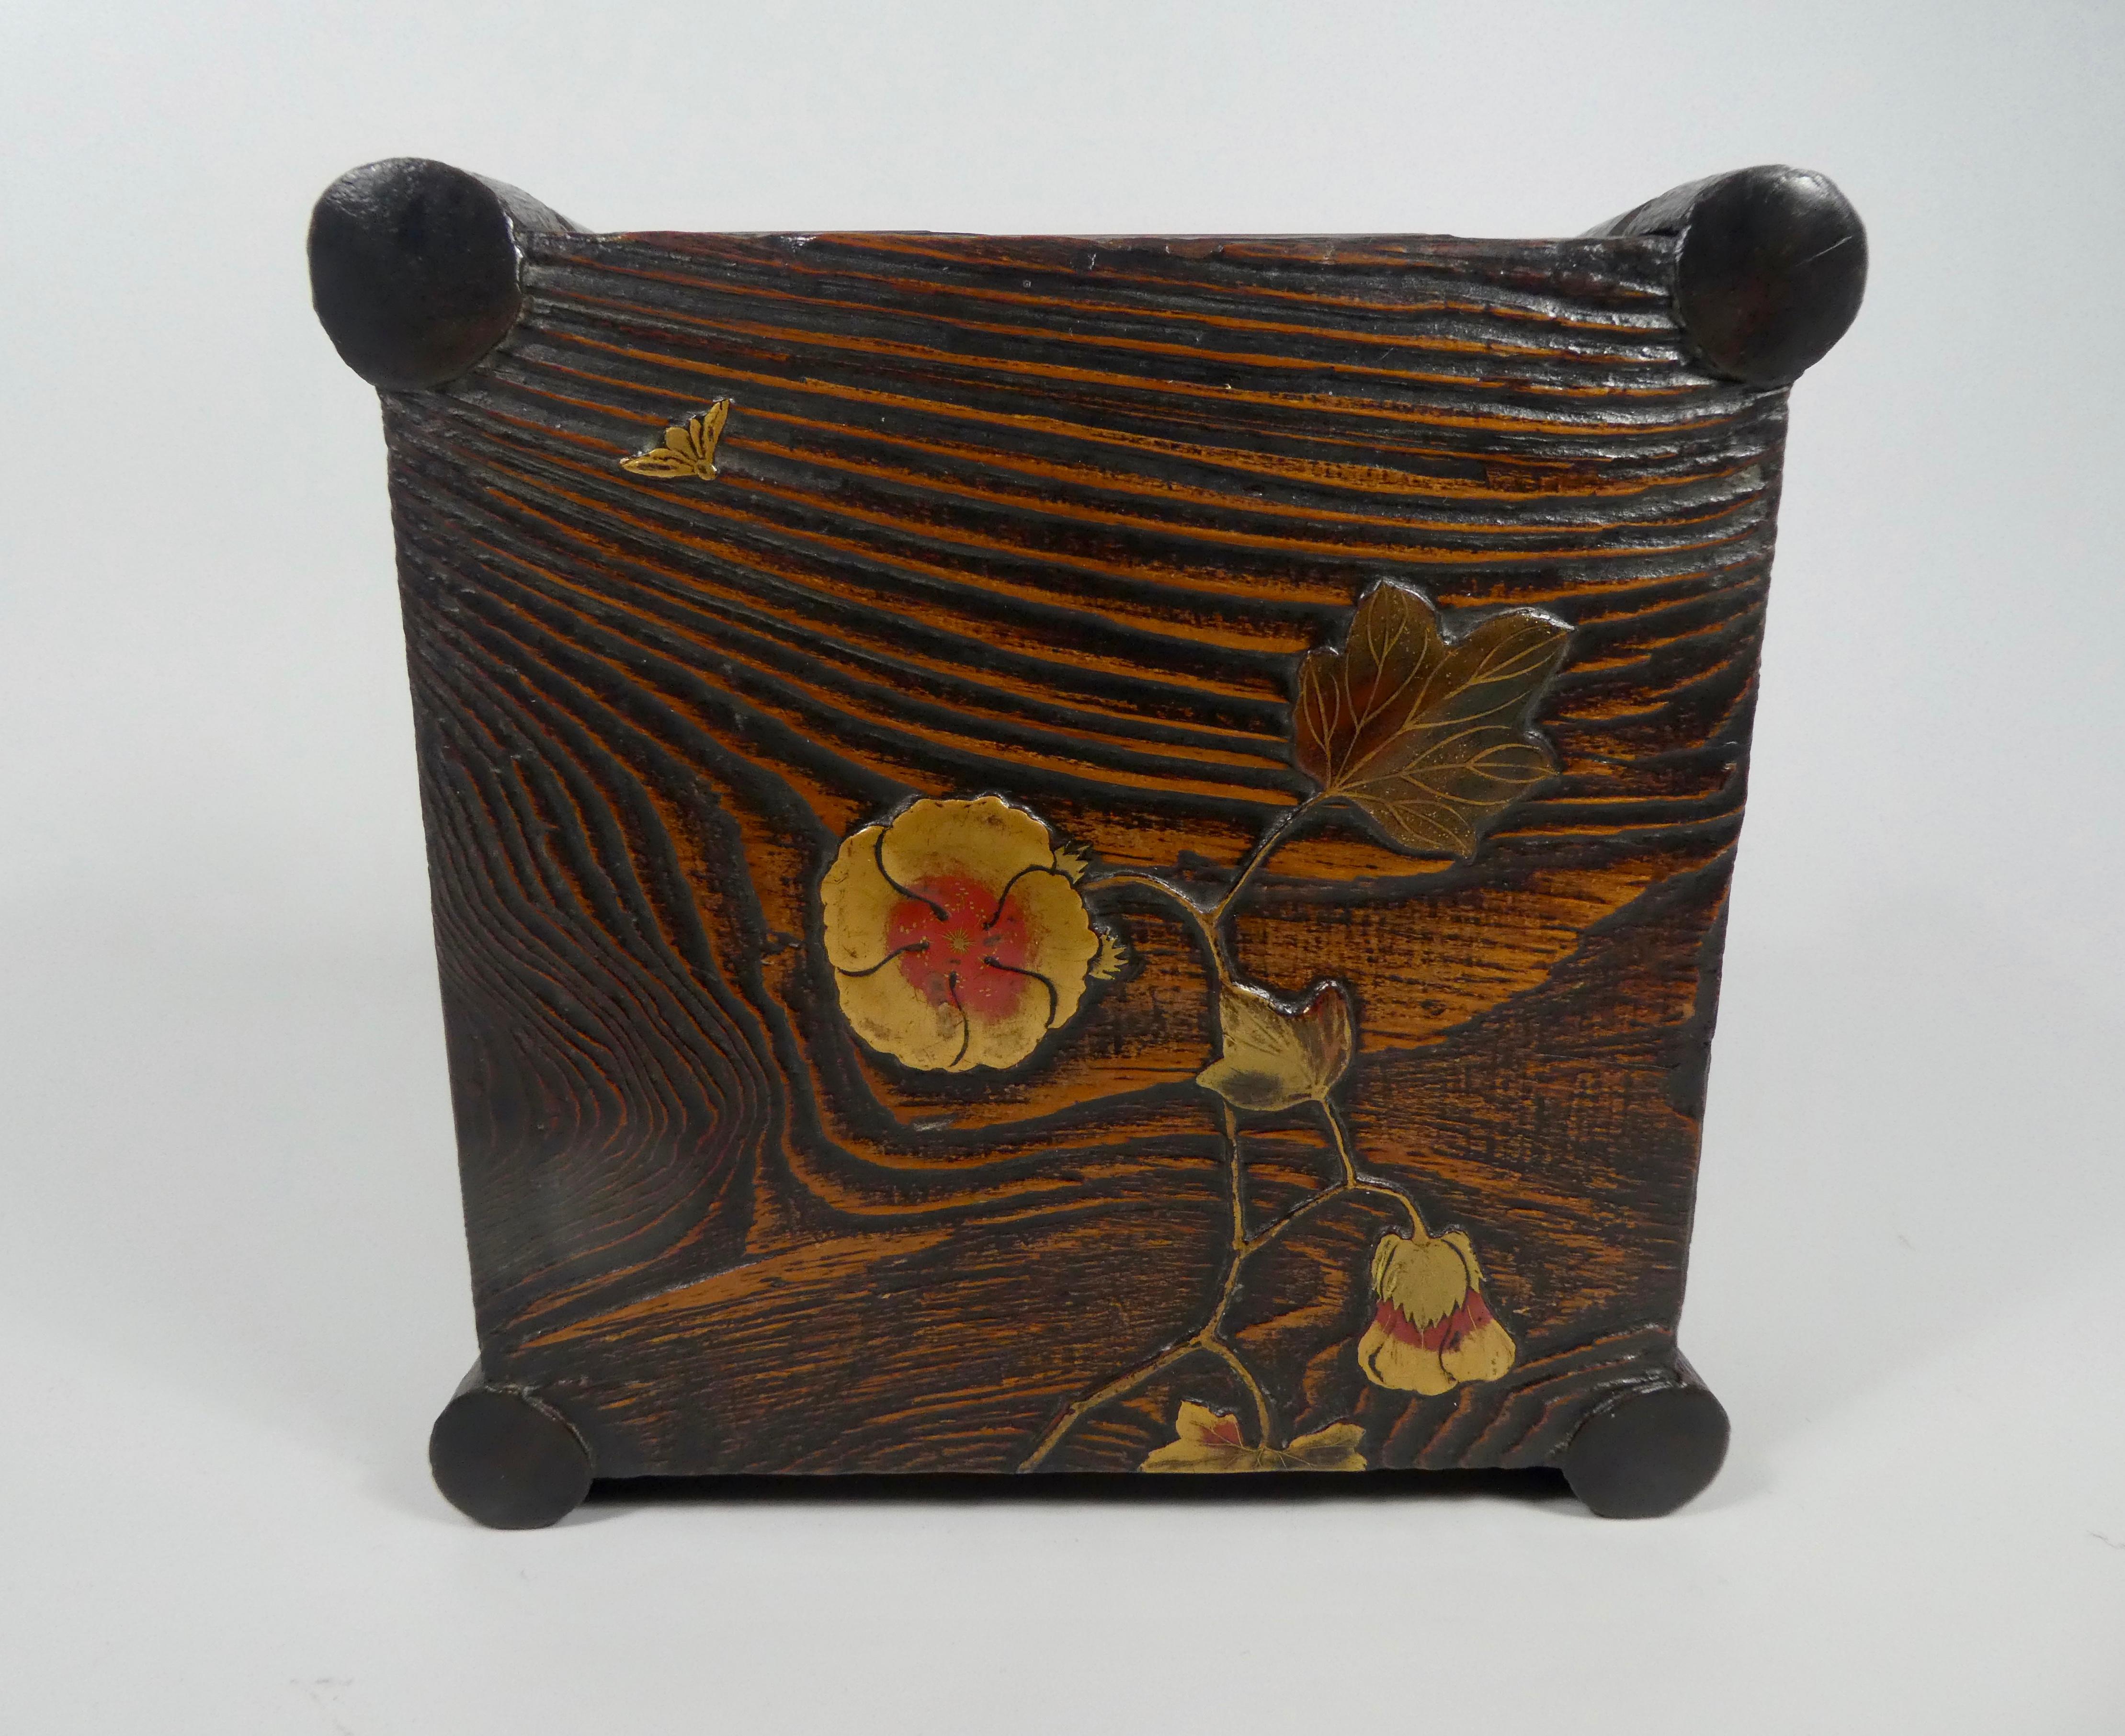 19th Century Japanese Lacquered Box and Cover, Meiji Period